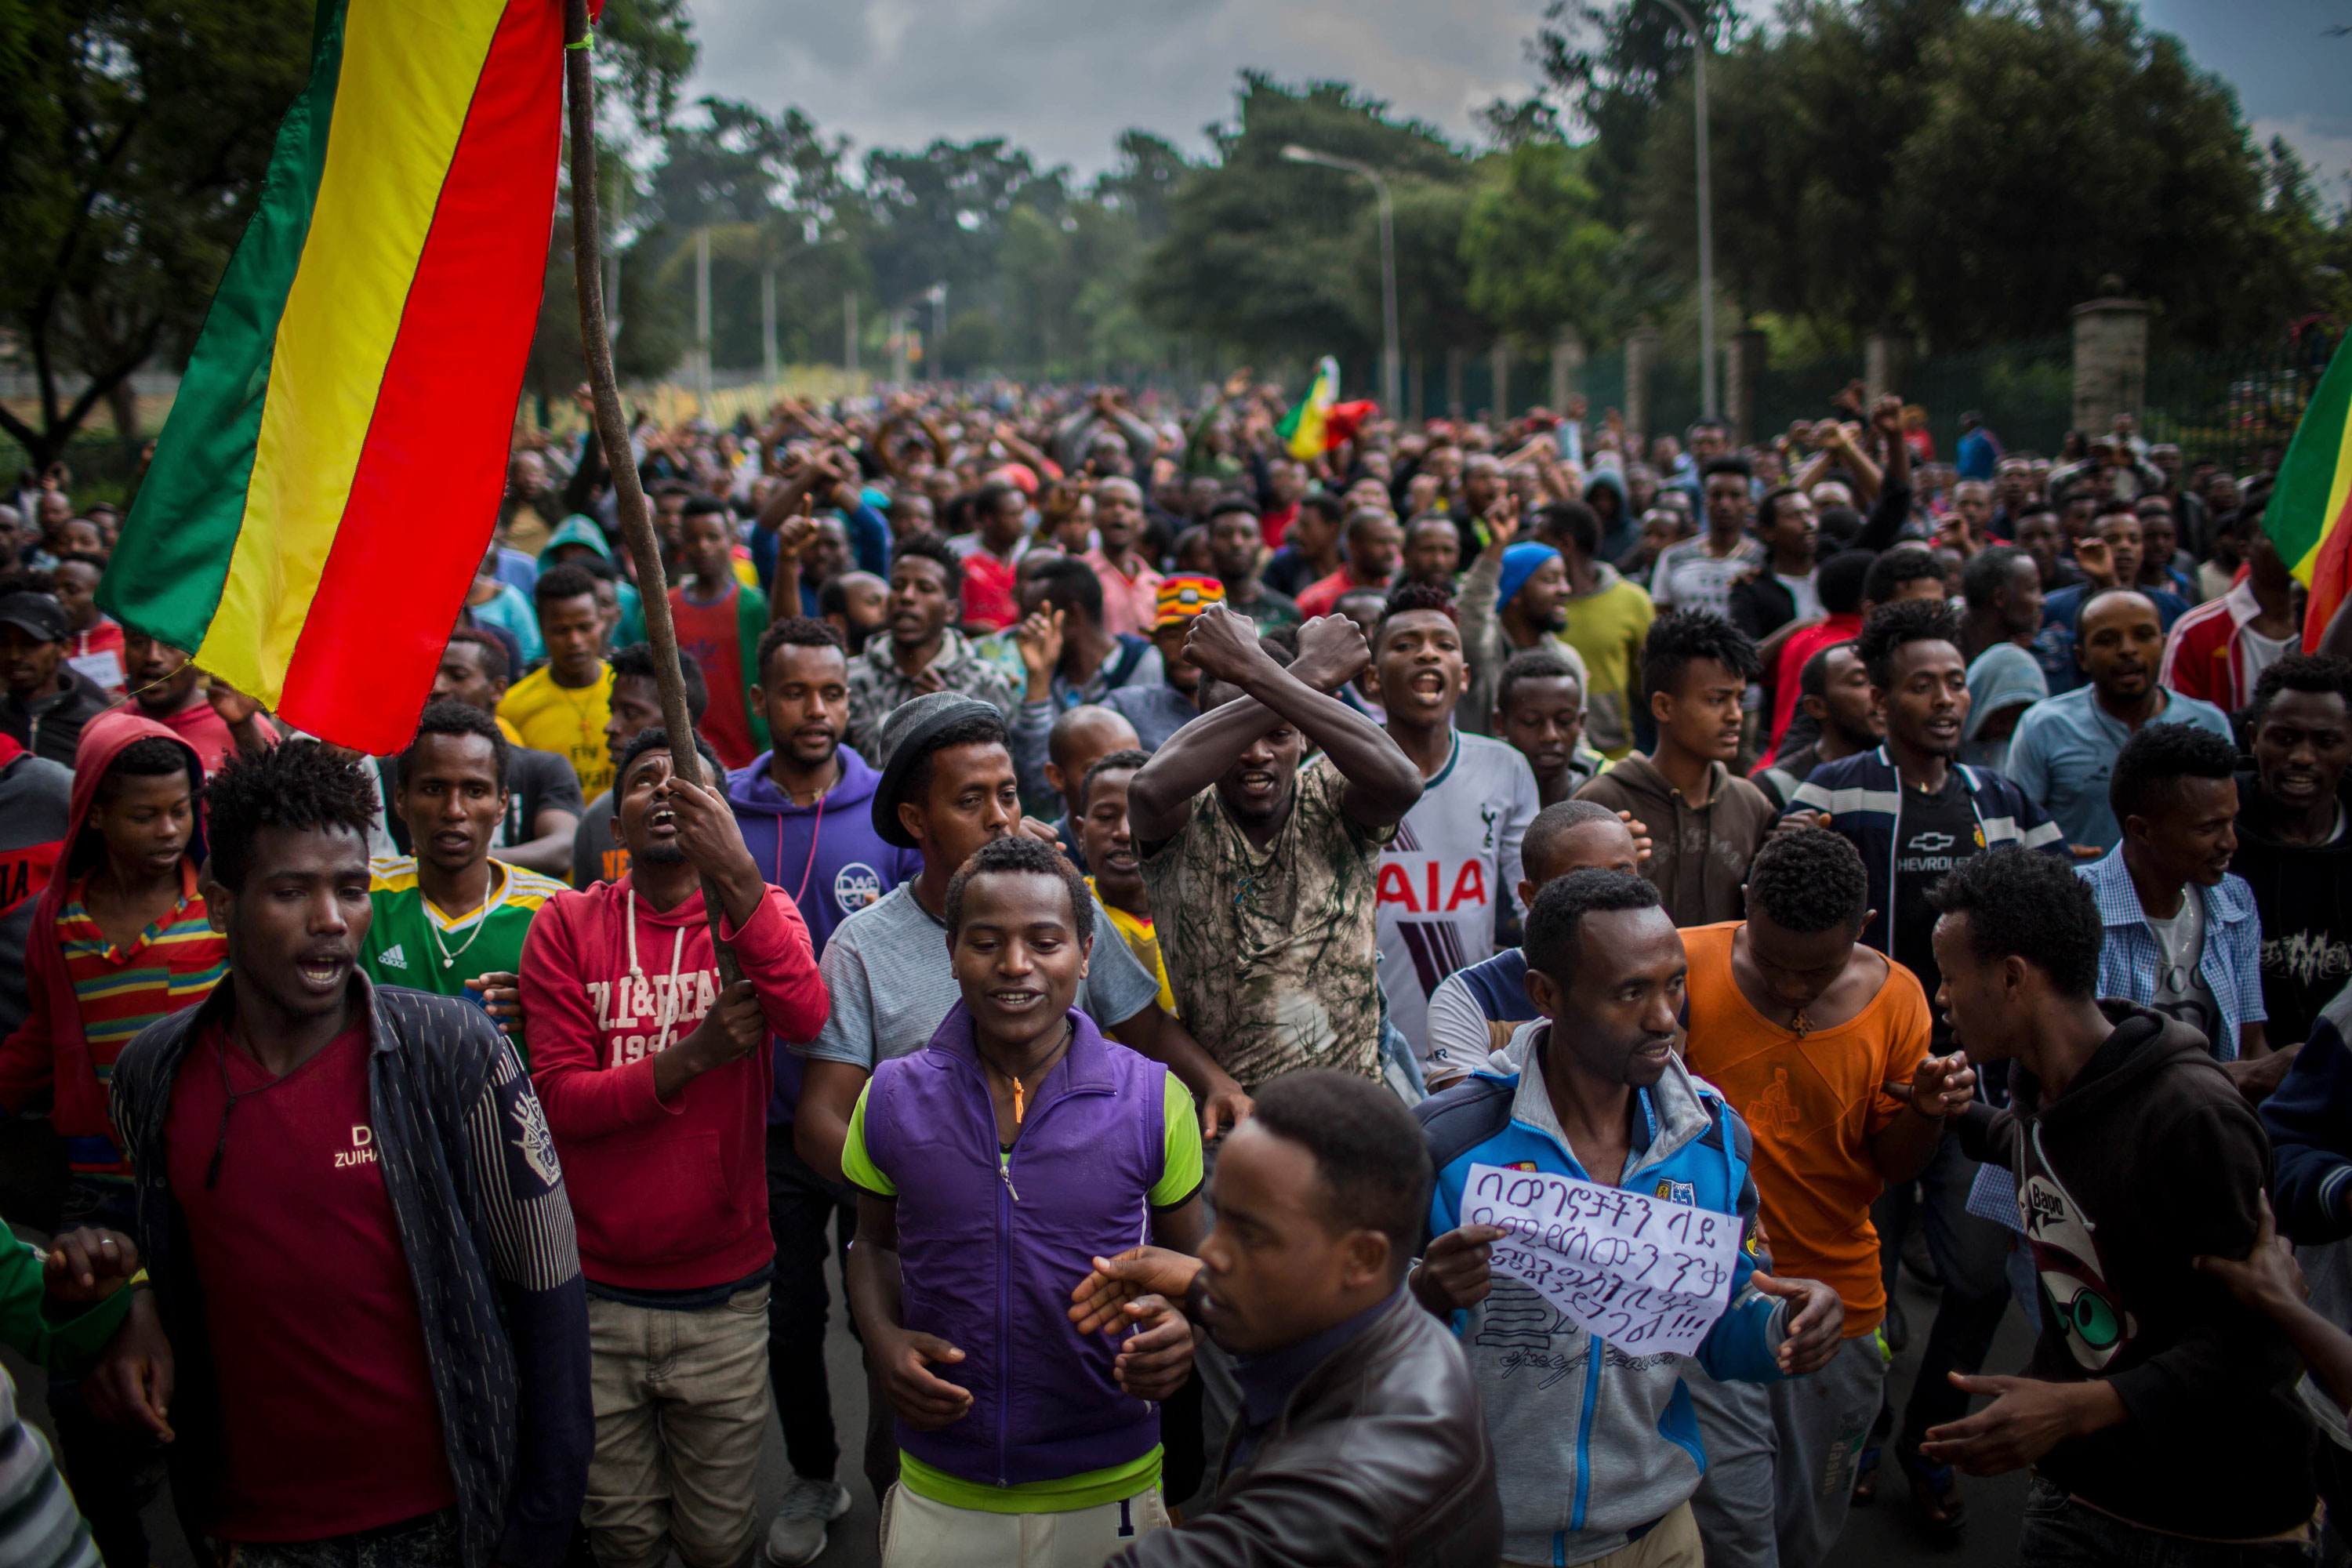 Photograph of thousands of protestors from the capital and those displaced by ethnic-based violence over the weekend in Burayu, demonstrate to demand justice from the government in Addis Ababa, Ethiopia Monday, Sept. 17, 2018.